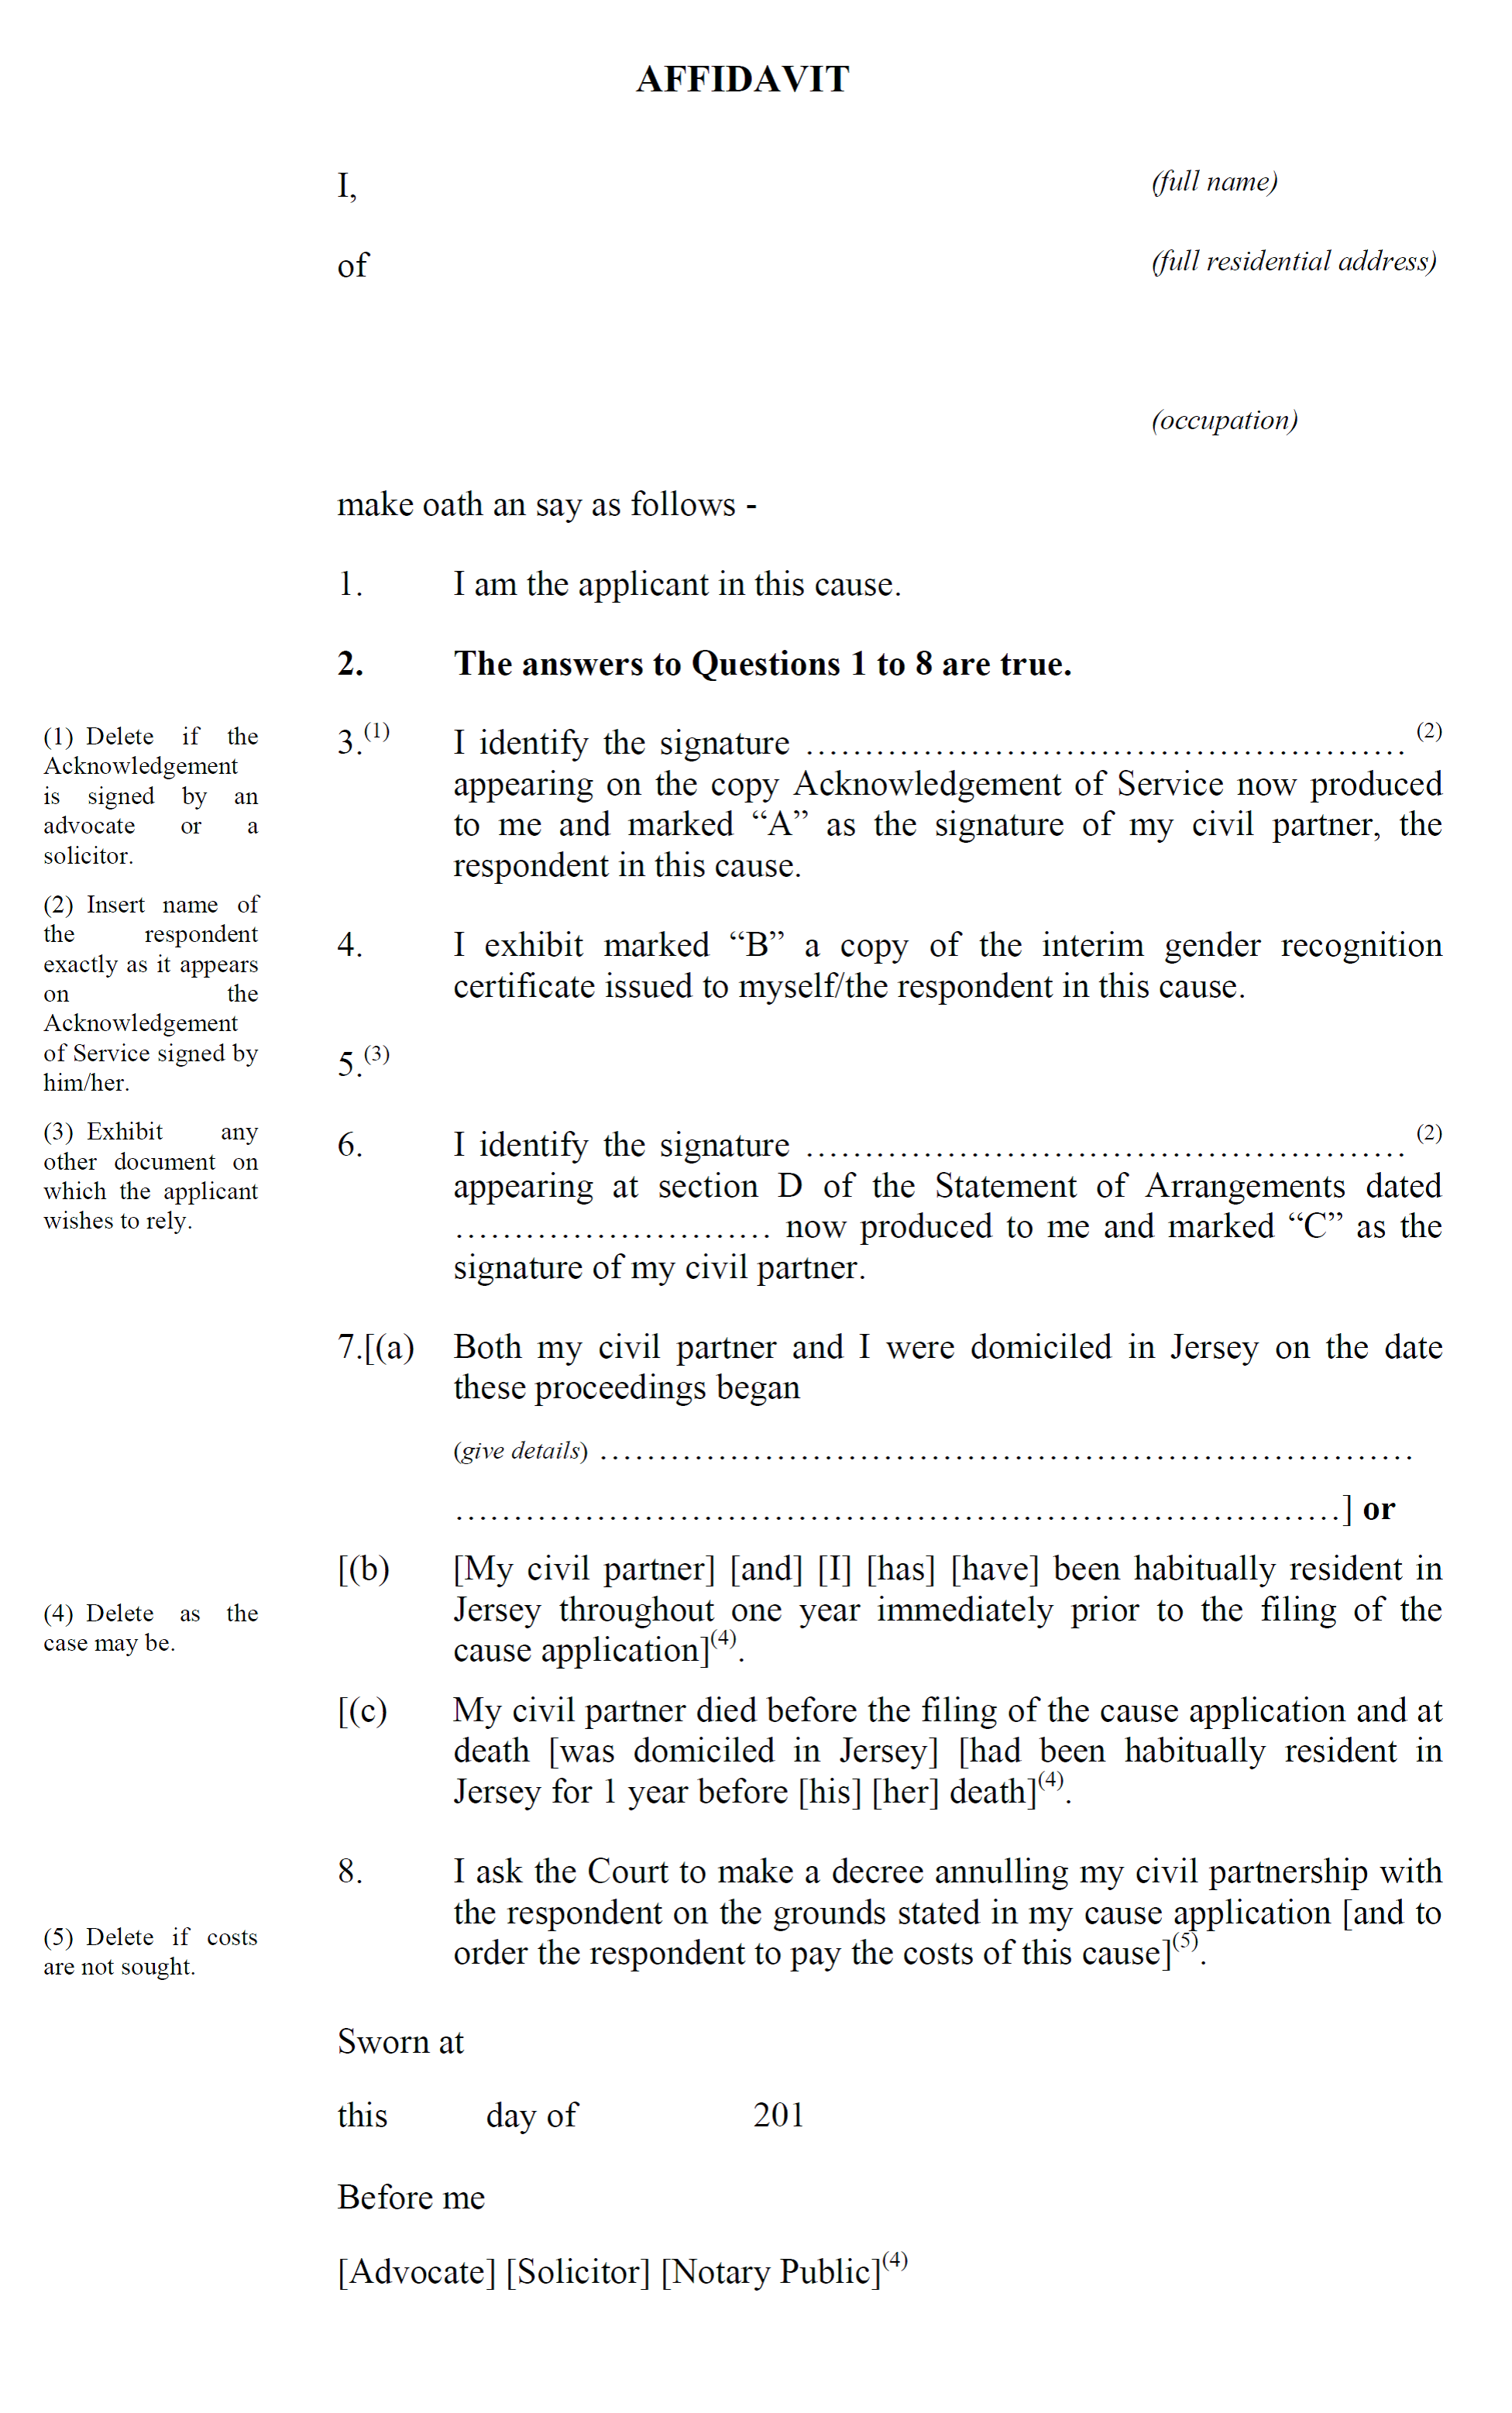 Form CP8 - Affidavit by applicant in support of cause application for annulment under Article 28(c)(i) of the Civil Partnership (Jersey) Law 2012 - continued